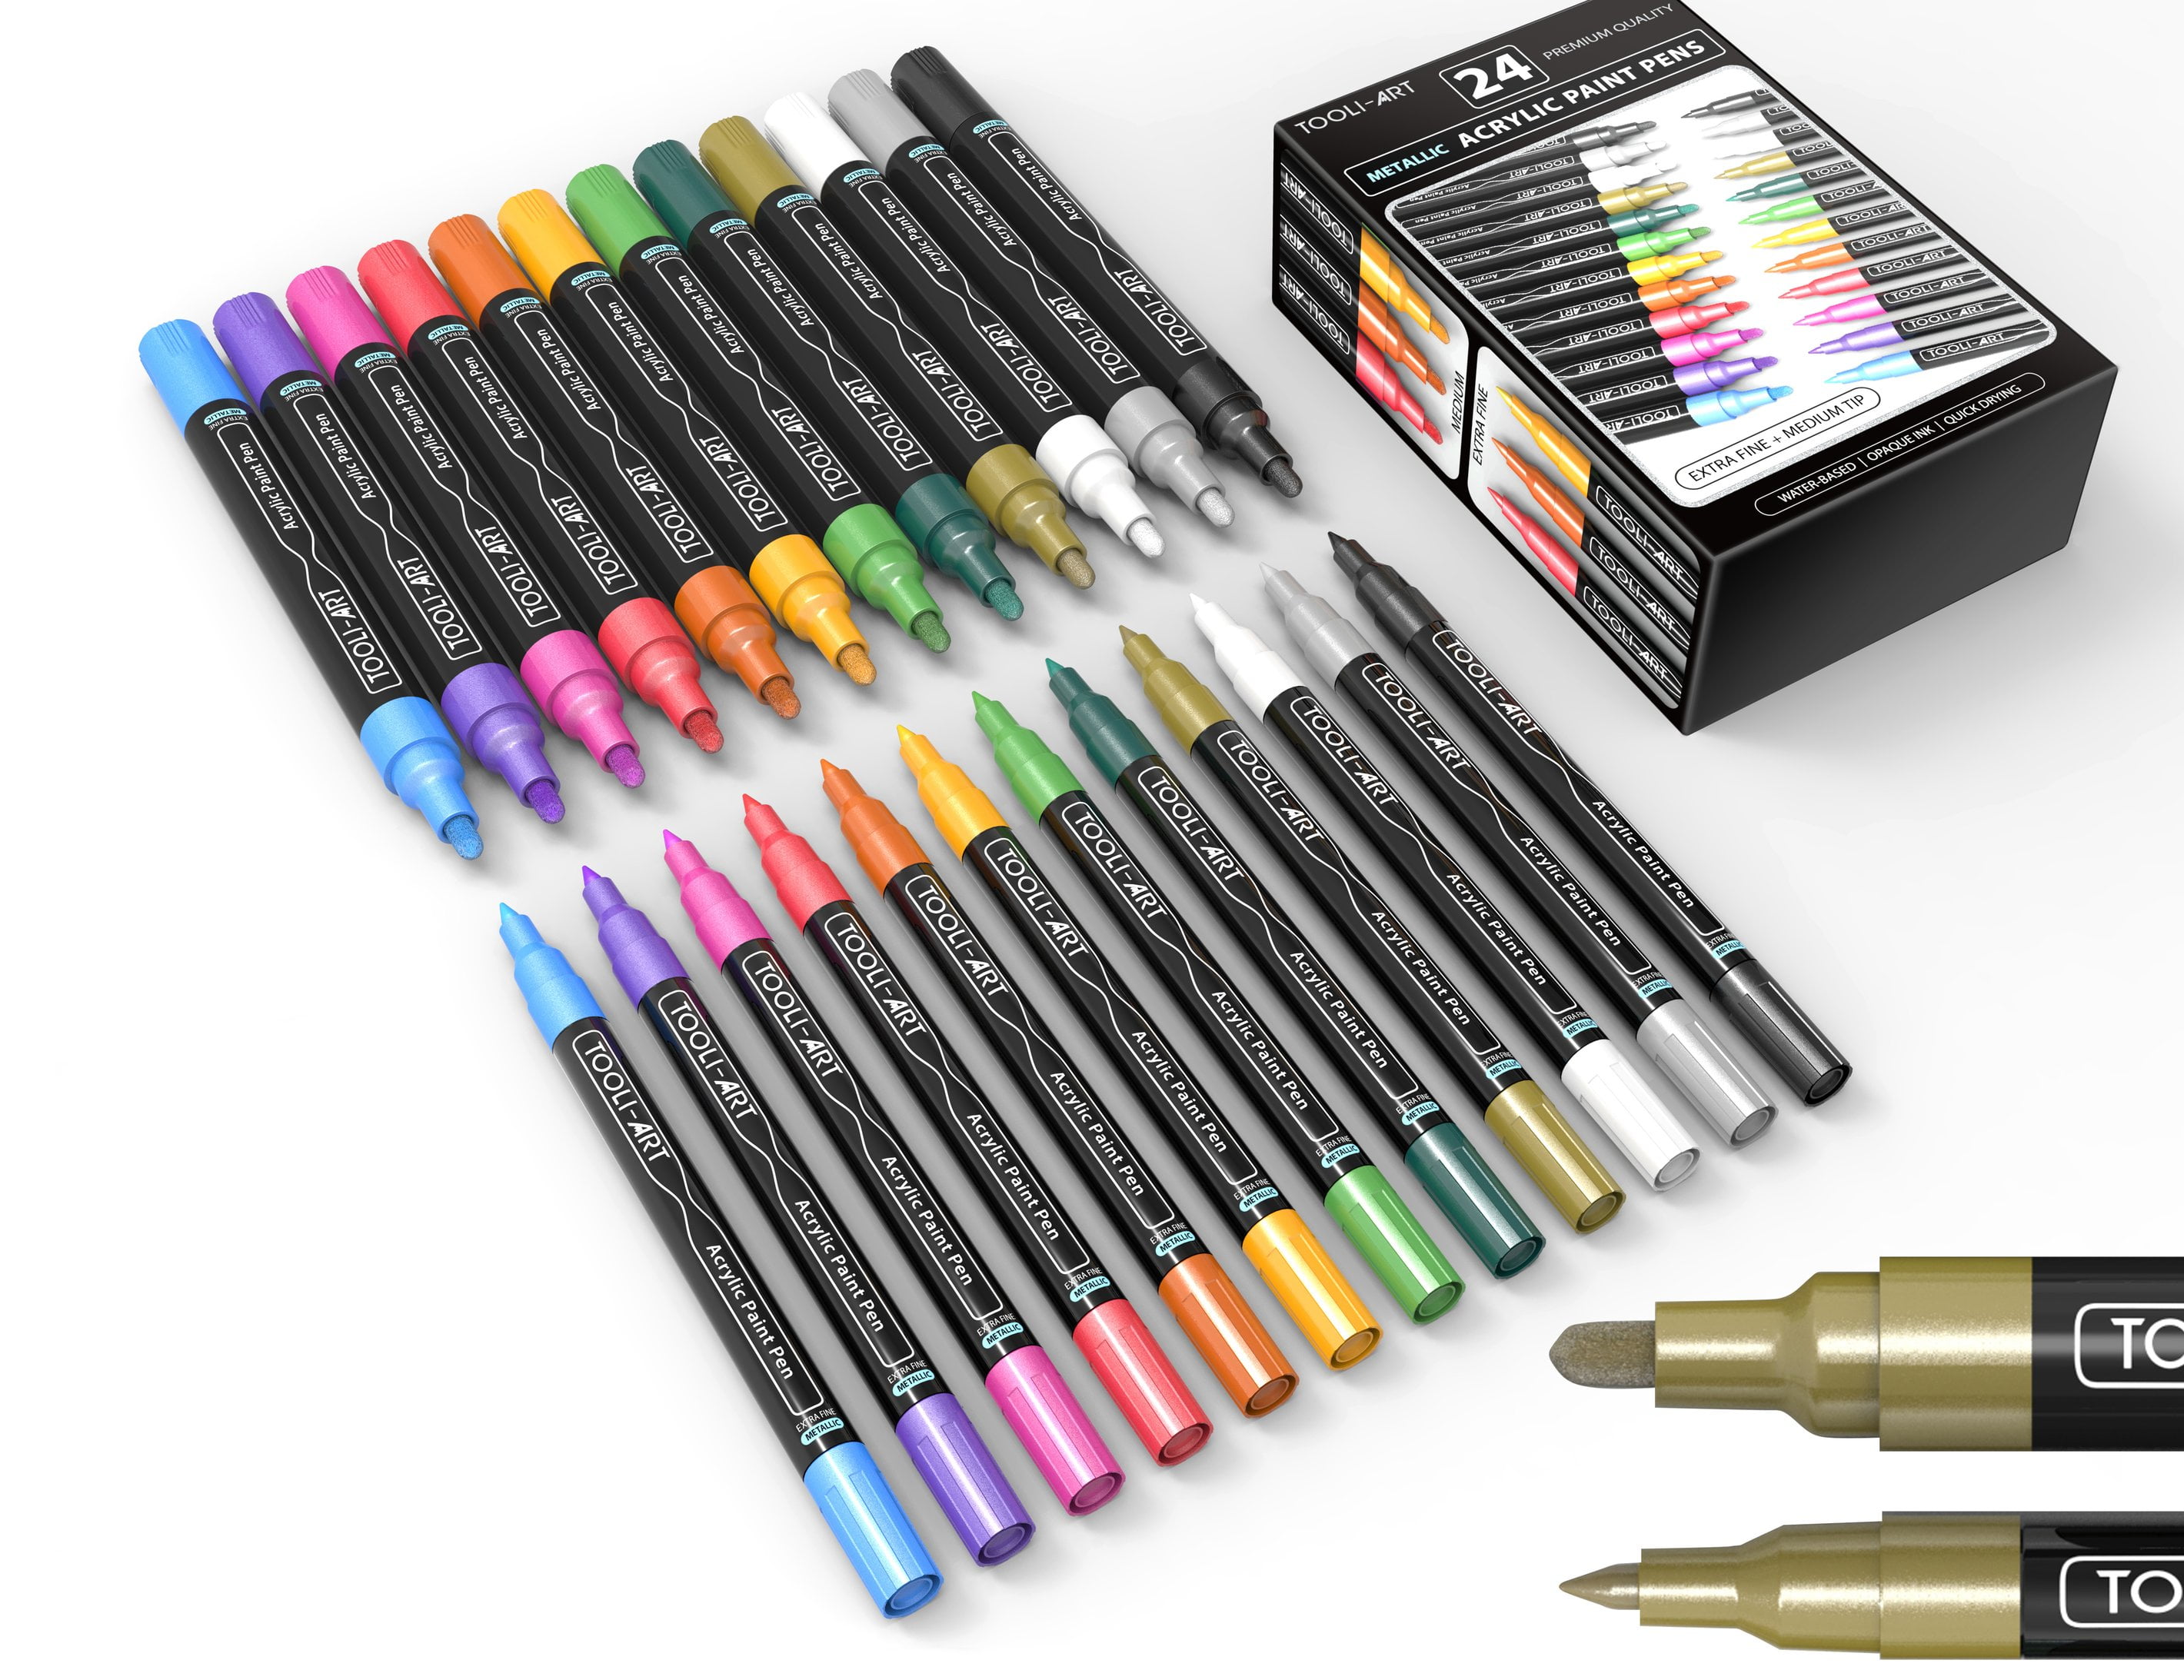 Almost All Surfaces Sun and Water Resistant Fine Point Metal Wood Water Based Colors for Kids Adults Ceramic Glass Paint on Rock 20 Paint Pens Clothes Paint Marker Pens Skin